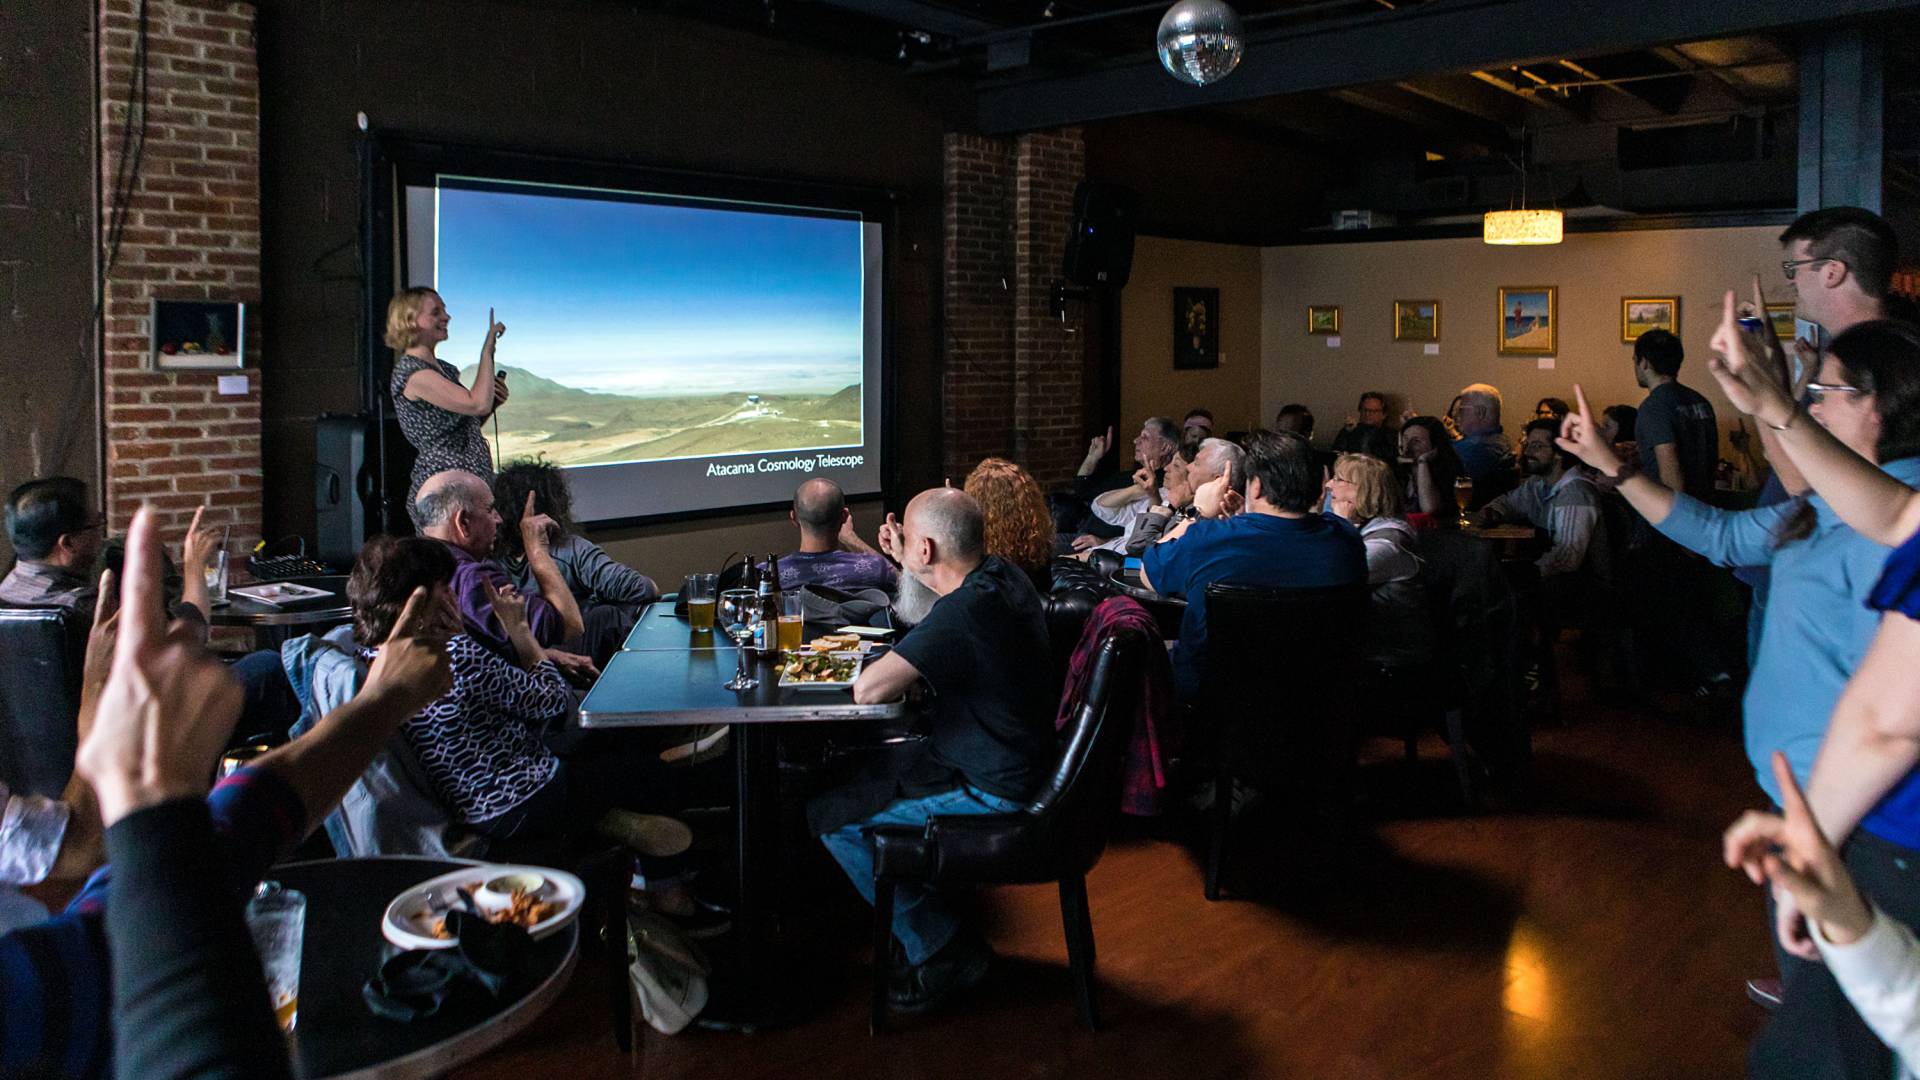 Astronomy on Tap brings astrophysicists and the community together at a Trenton